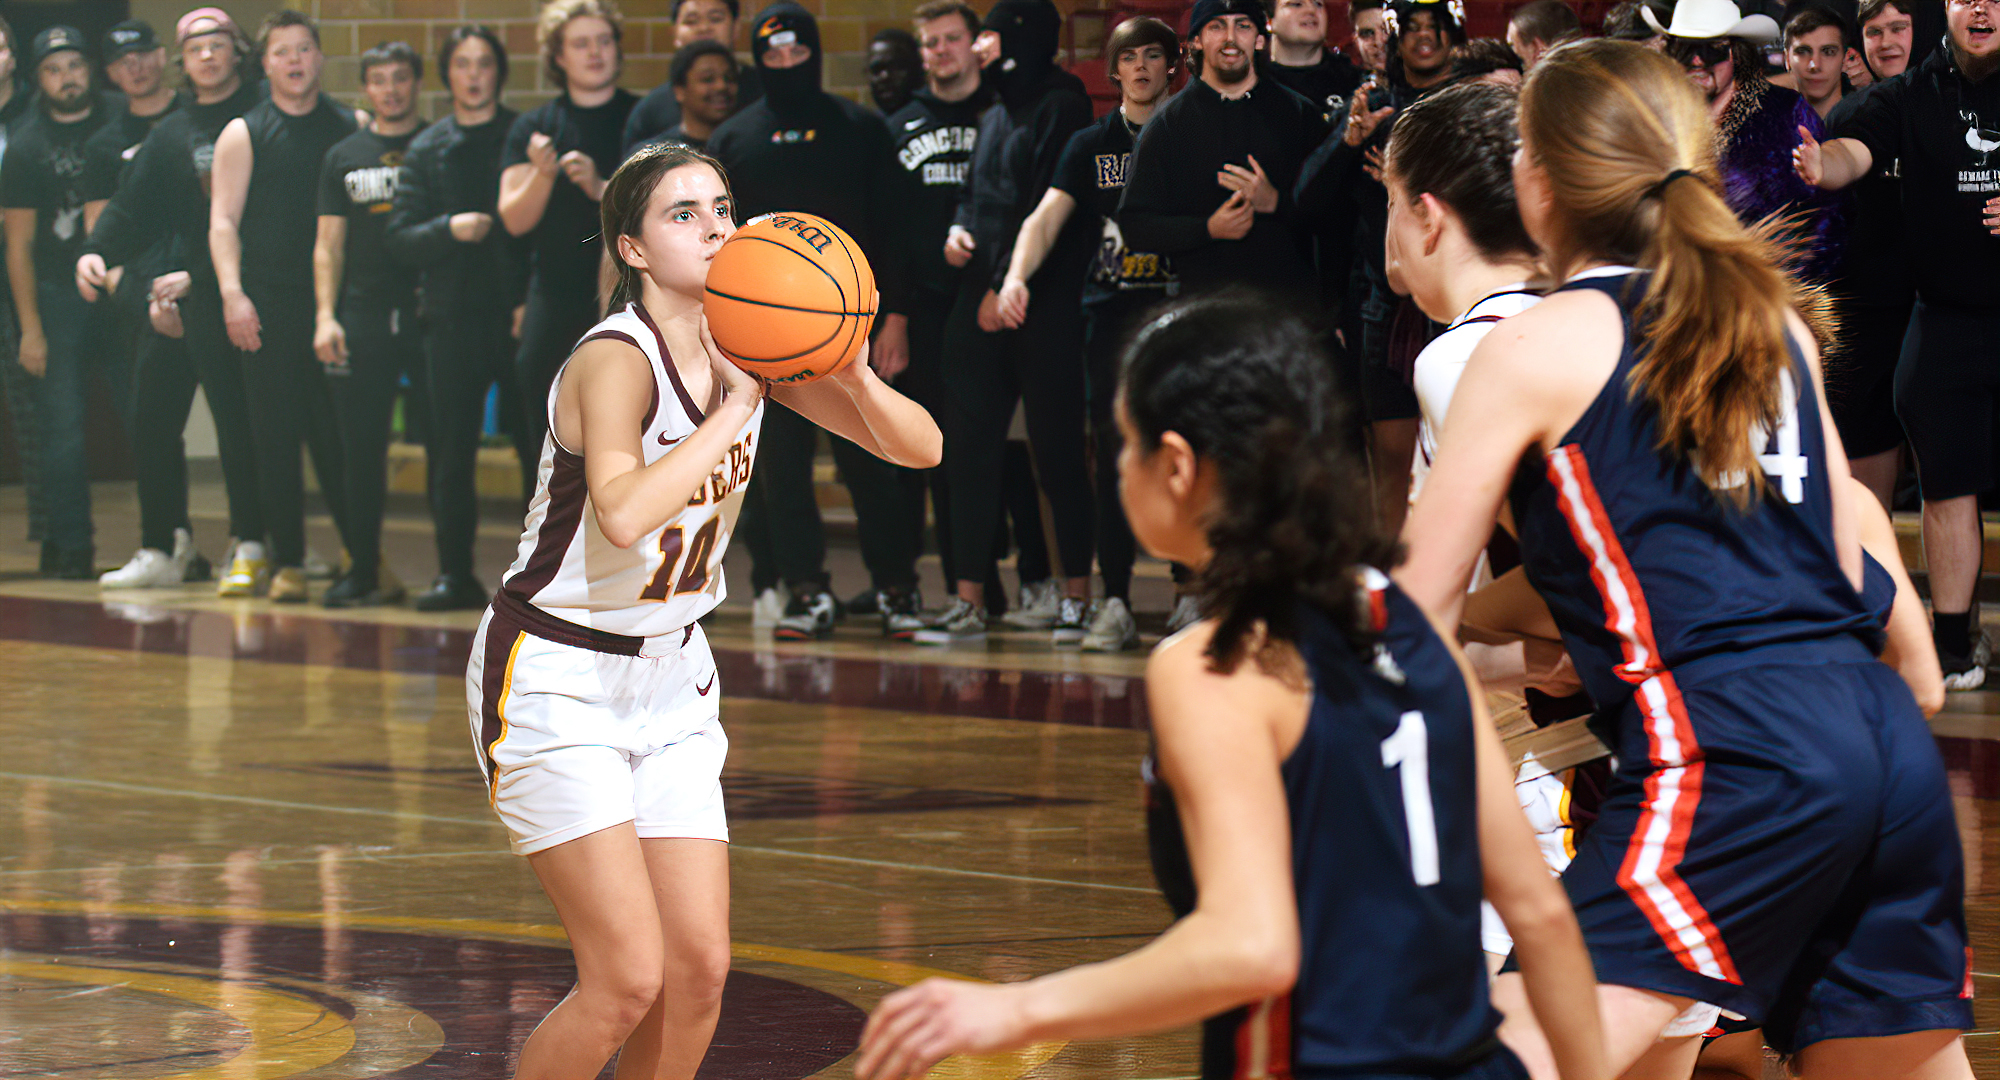 Carlee Sieben gets ready to knock down one of her three shots from outside the arc during the Cobbers convincing win over Macalester.